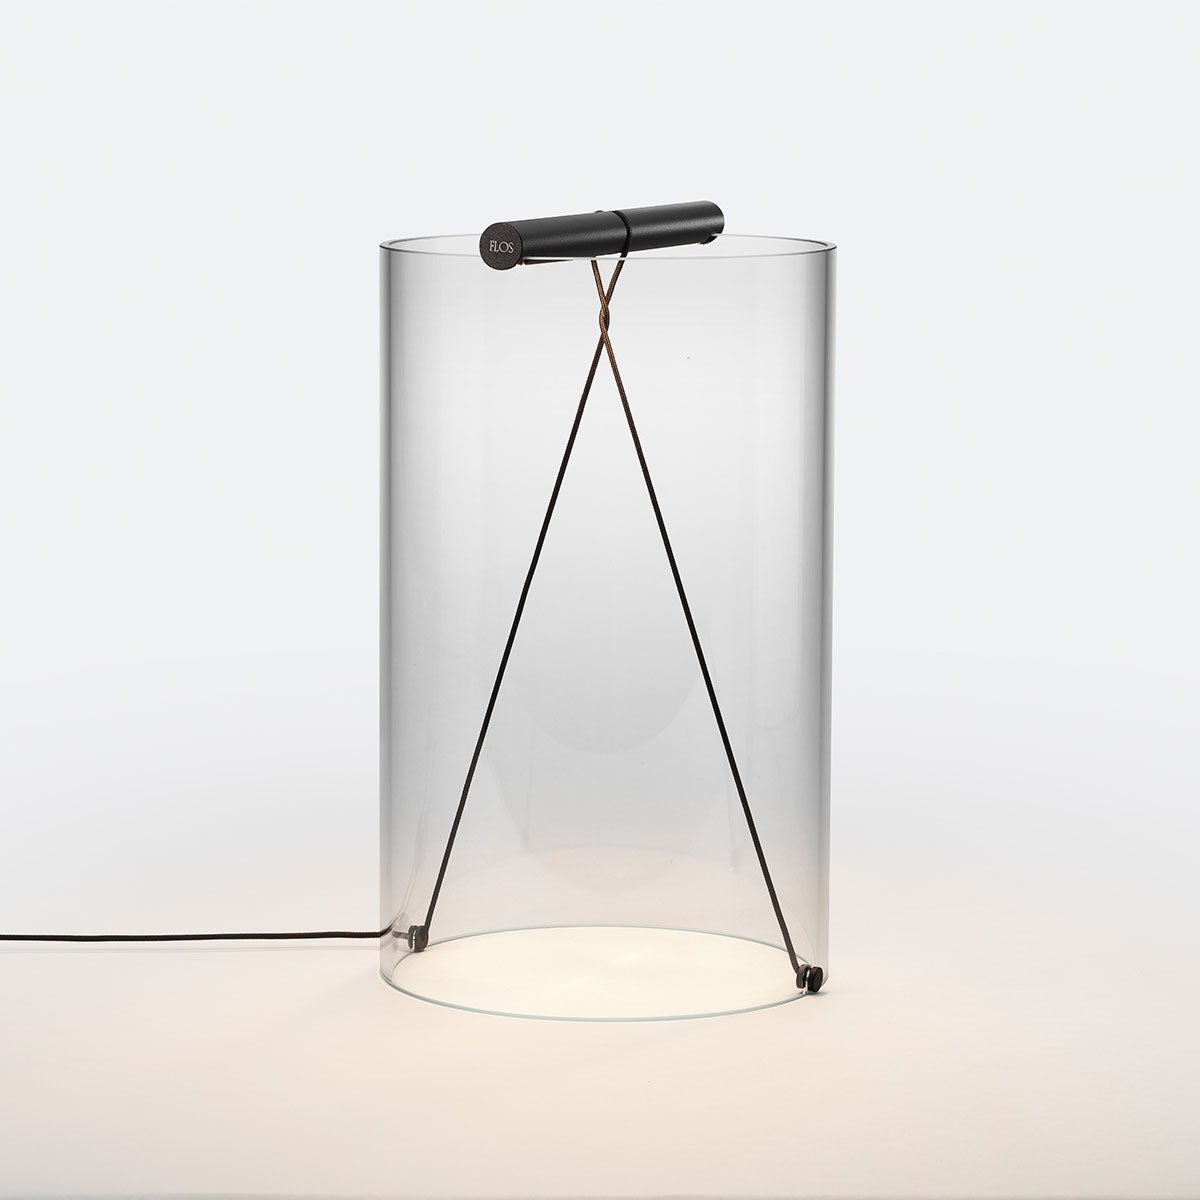 Flos To-Tie T2 Table Lamp in Anodized Black by Guglielmo Poletti For Sale